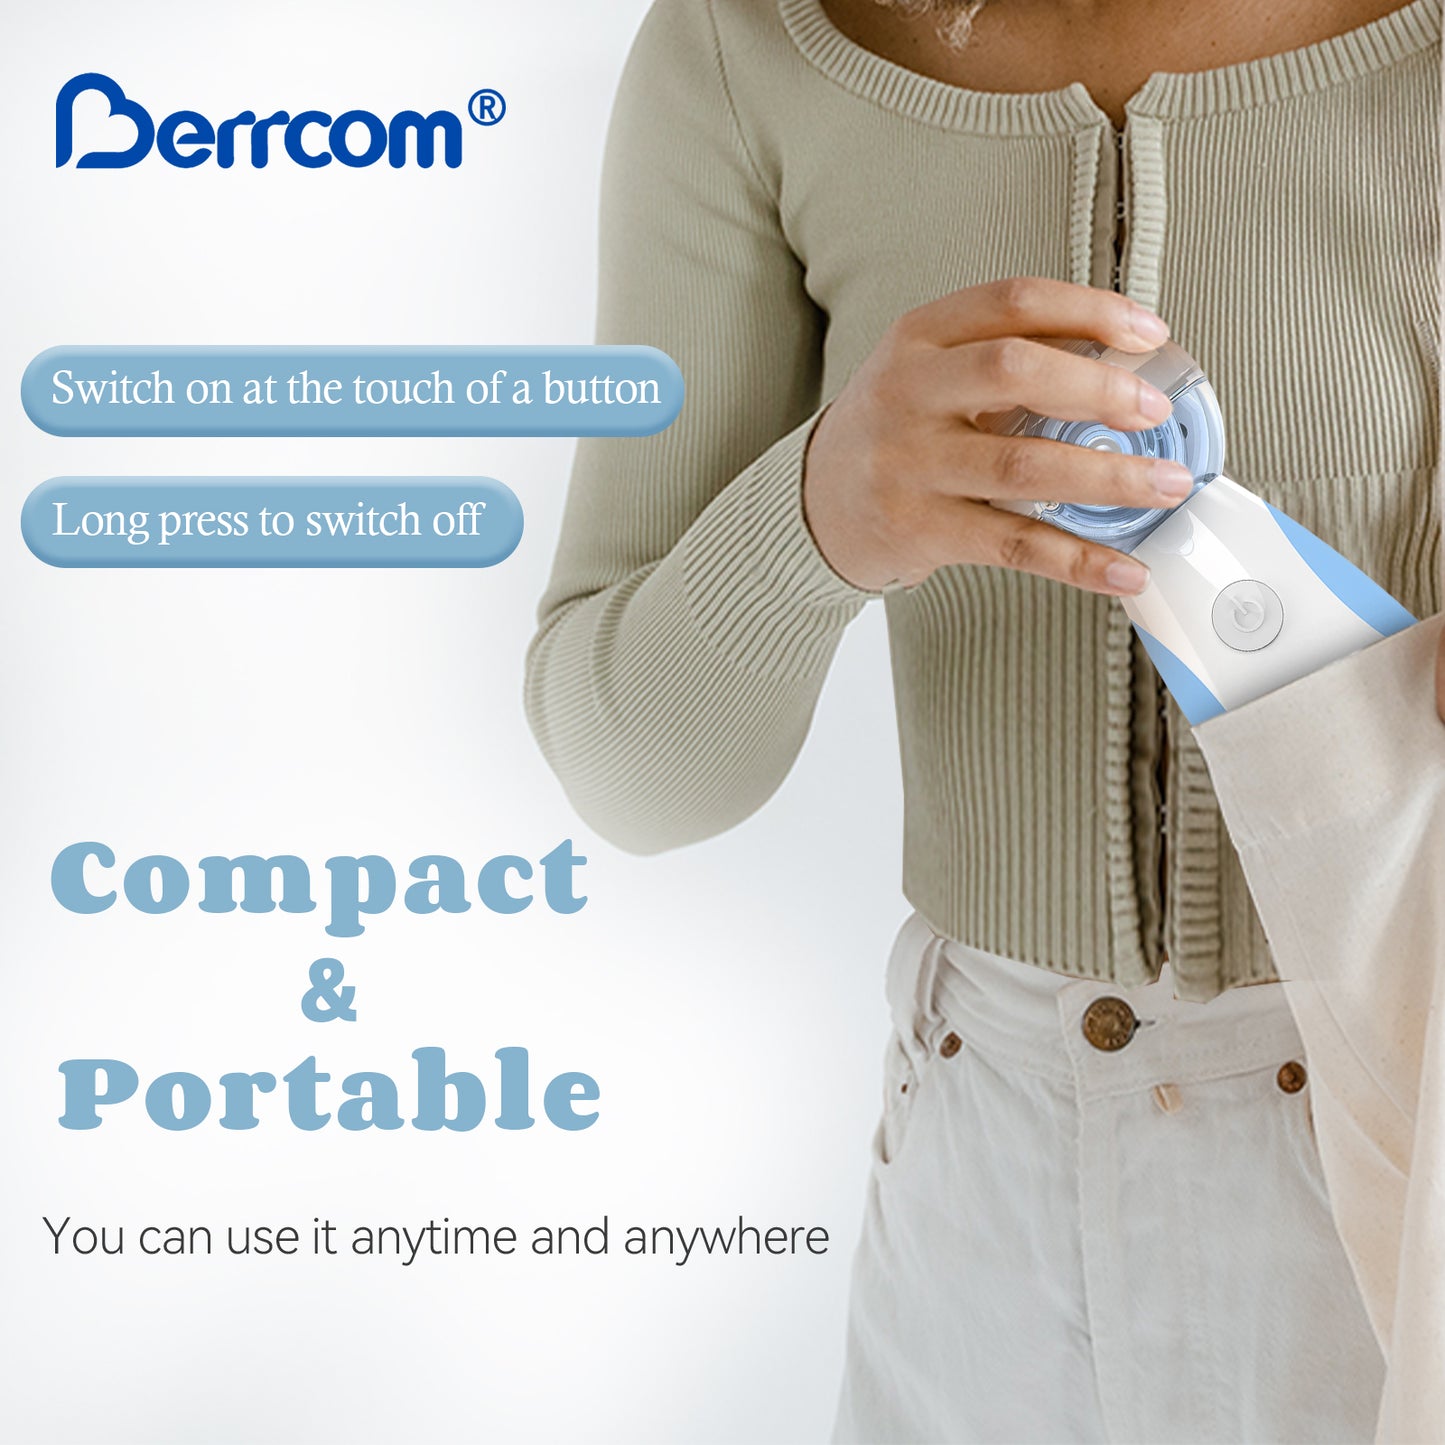 Berrcom Portable Nebulizer Machine for Adults and Kids Handheld Nebulizer for Home and Travel Use, Silent, Efficient Atomization and Easy to Use